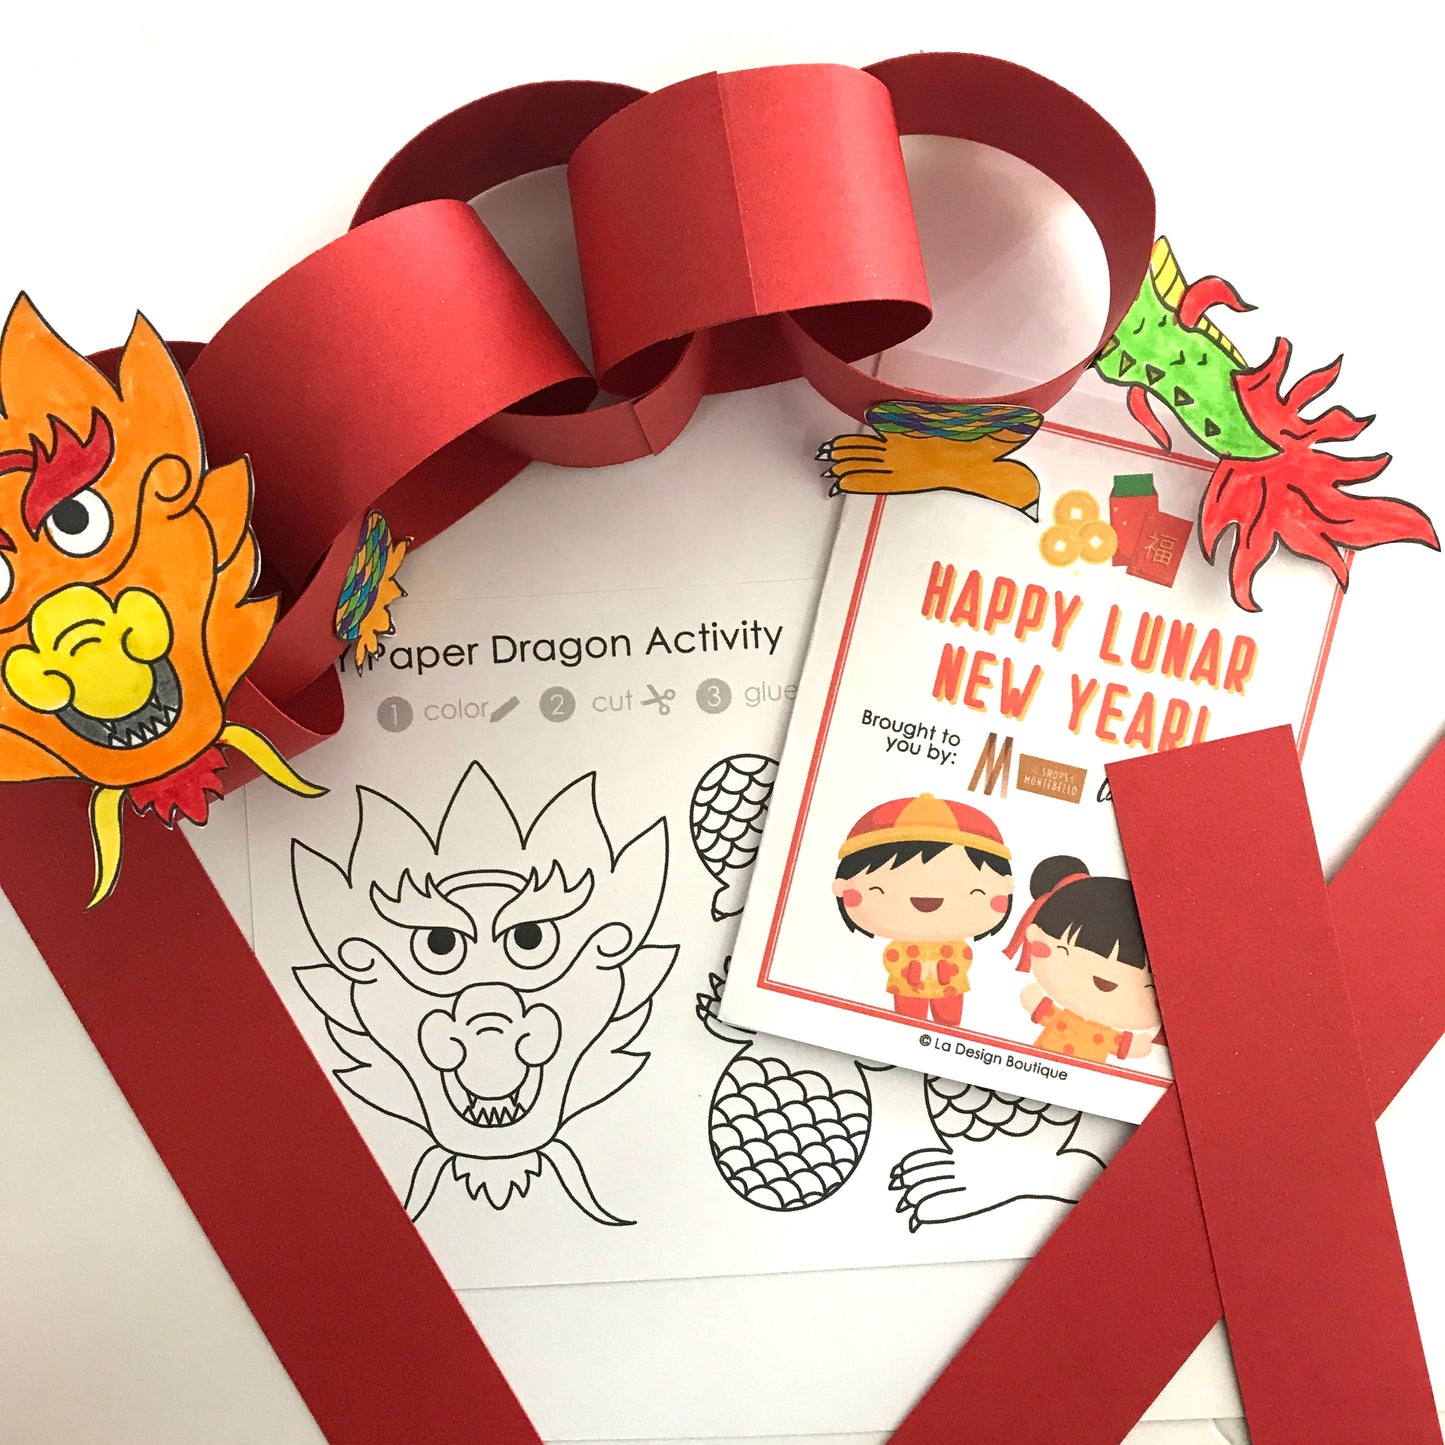 Lunar New Year Activity Sheets for Kids with DIY Paper Dragon